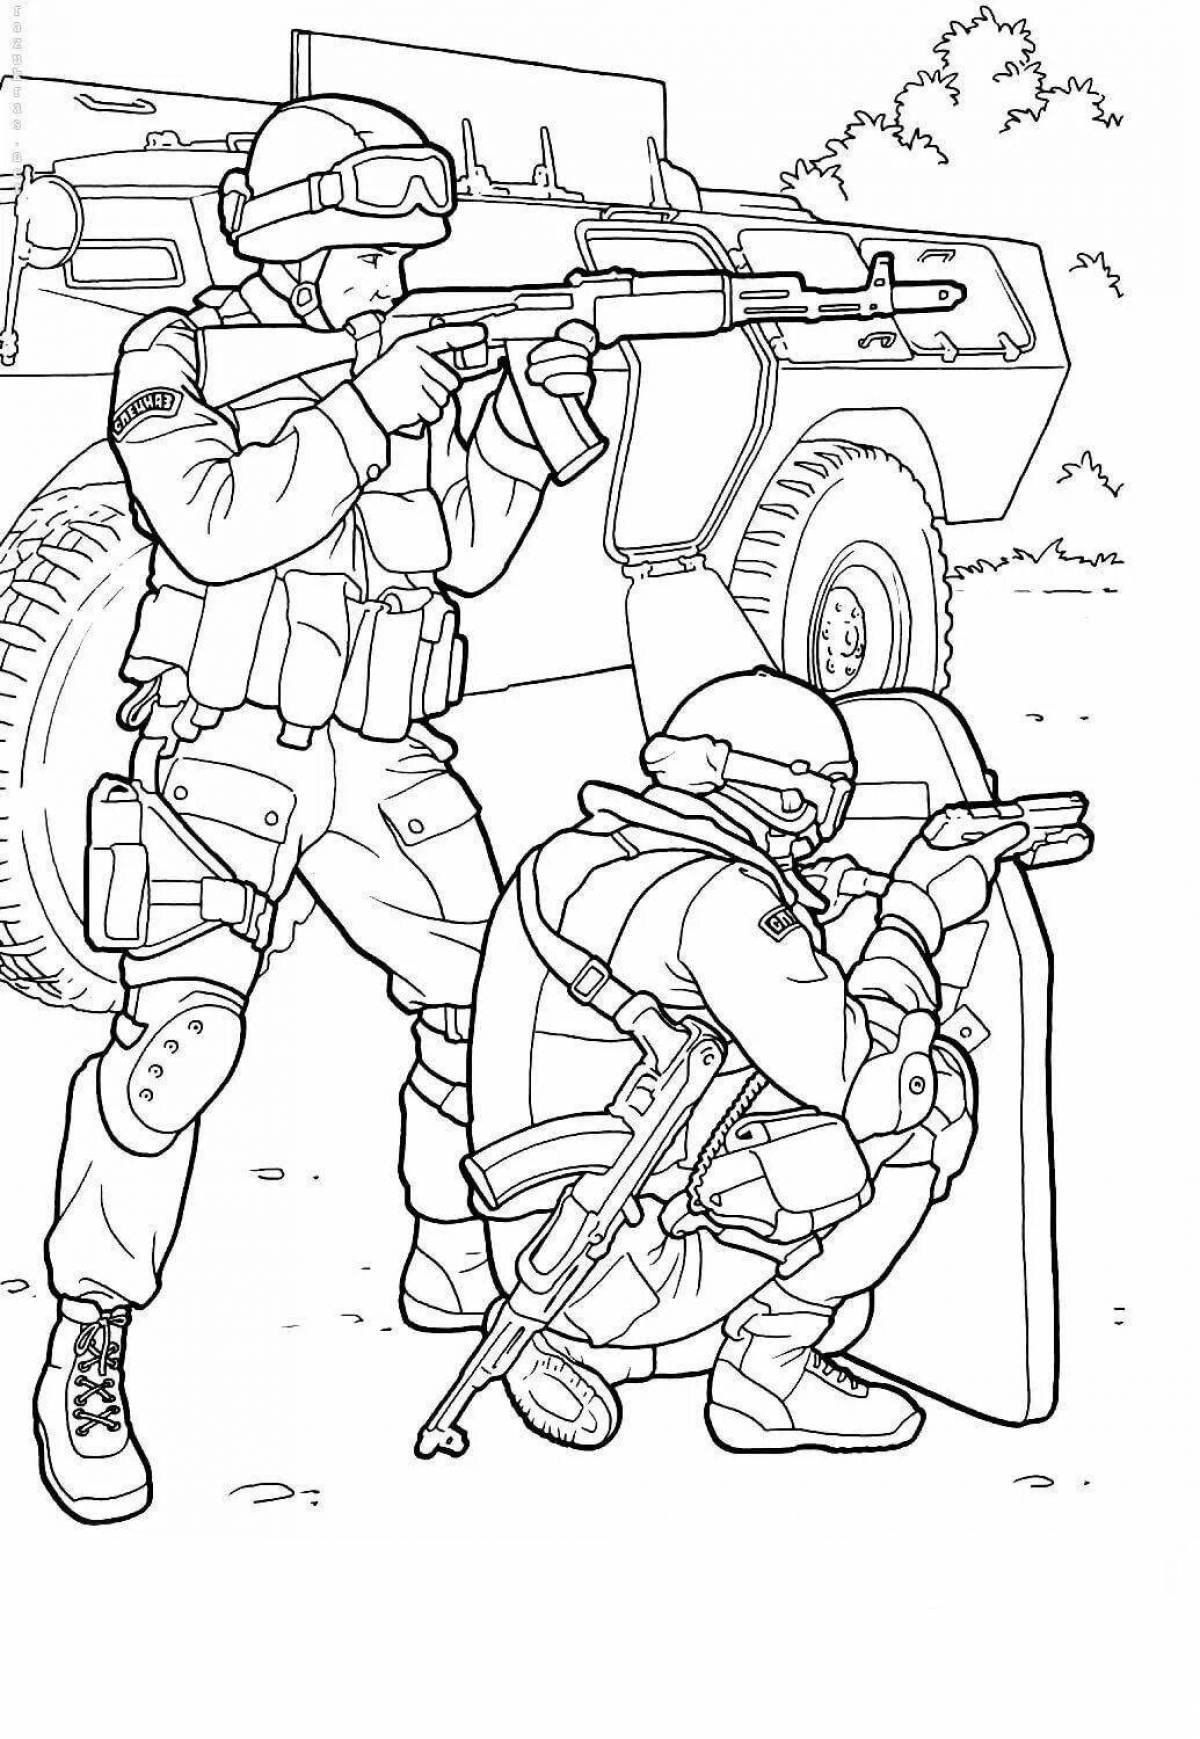 Coloring page gorgeous special forces vehicle